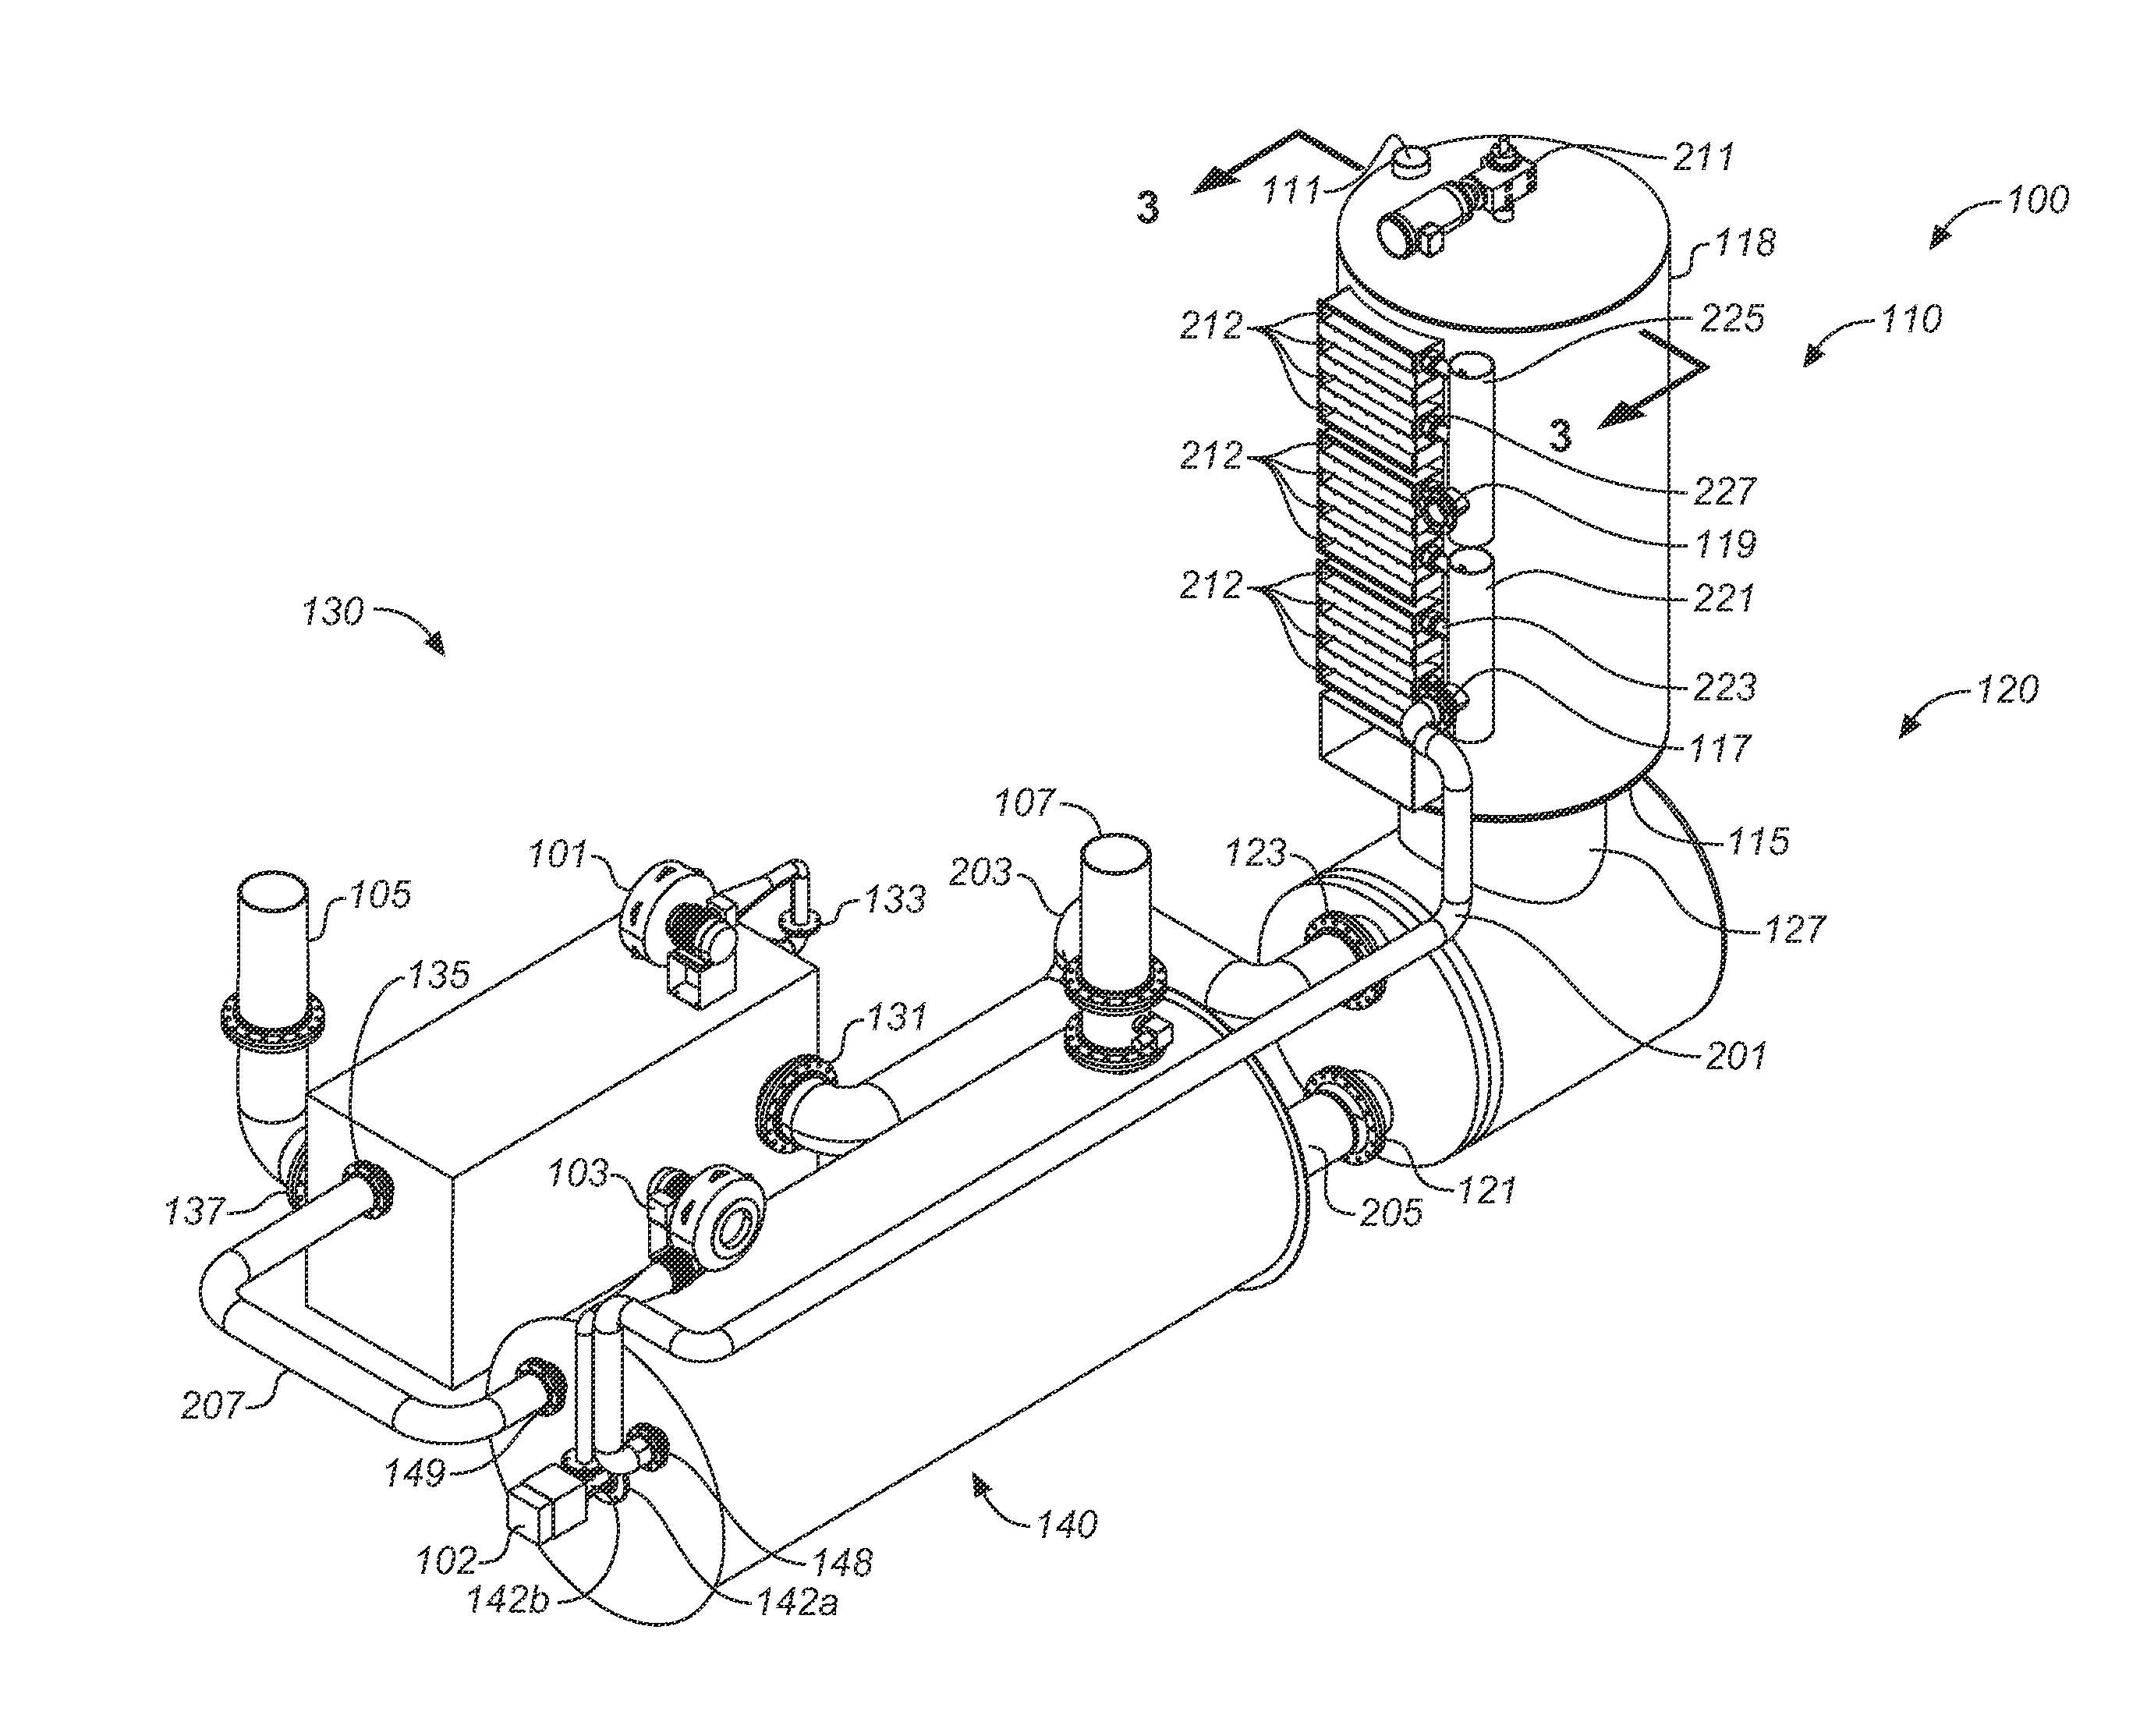 Furnace including multiple trays and phase-change heat transfer